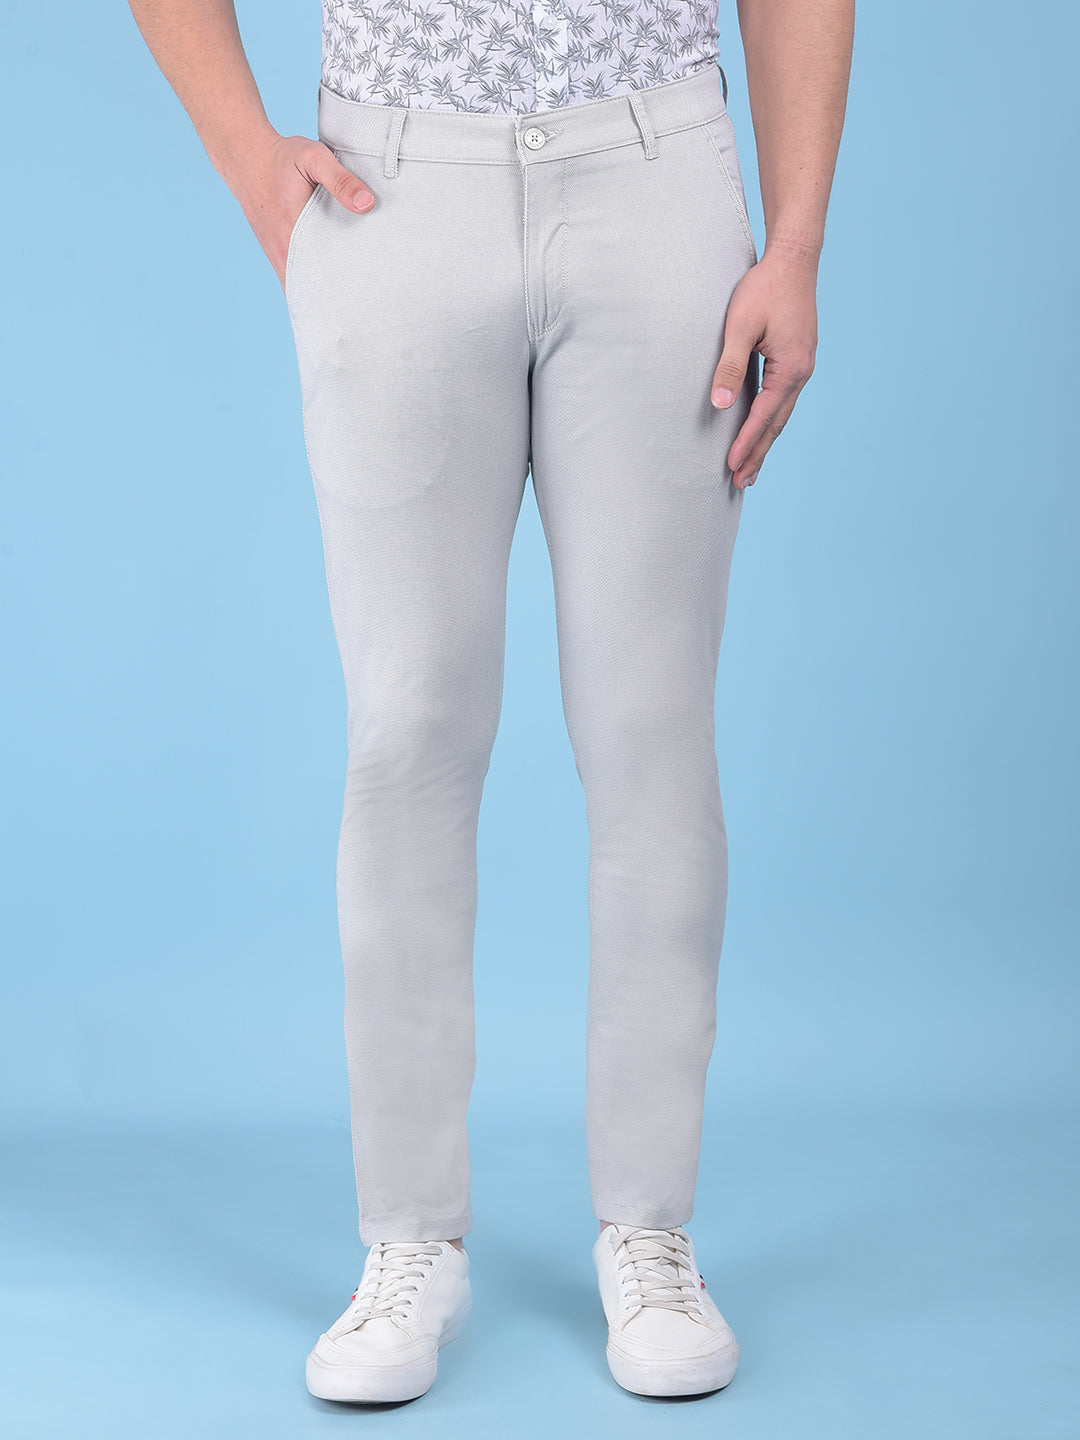 Grey Printed Stretchable Cotton Trousers-Men Trousers-Crimsoune Club